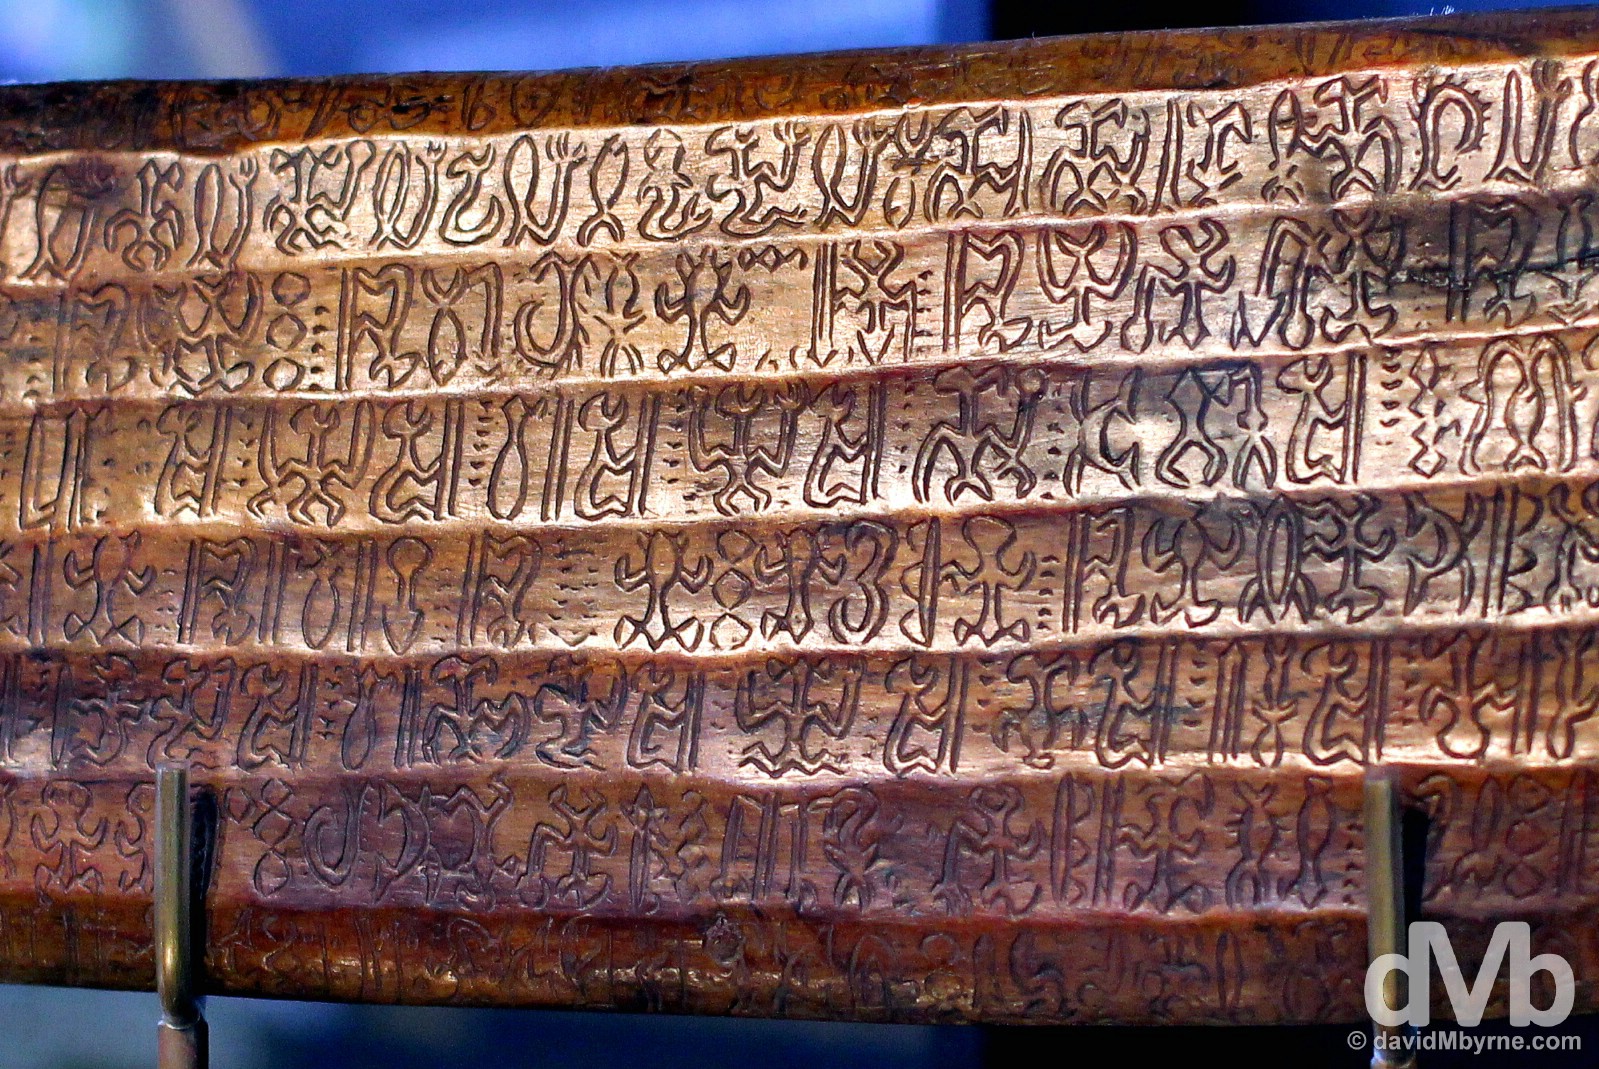 A Rongorongo tablet on display in the Museo Antropologico P. Sebastian Englert, Easter Island, Chile. September 30, 2015.